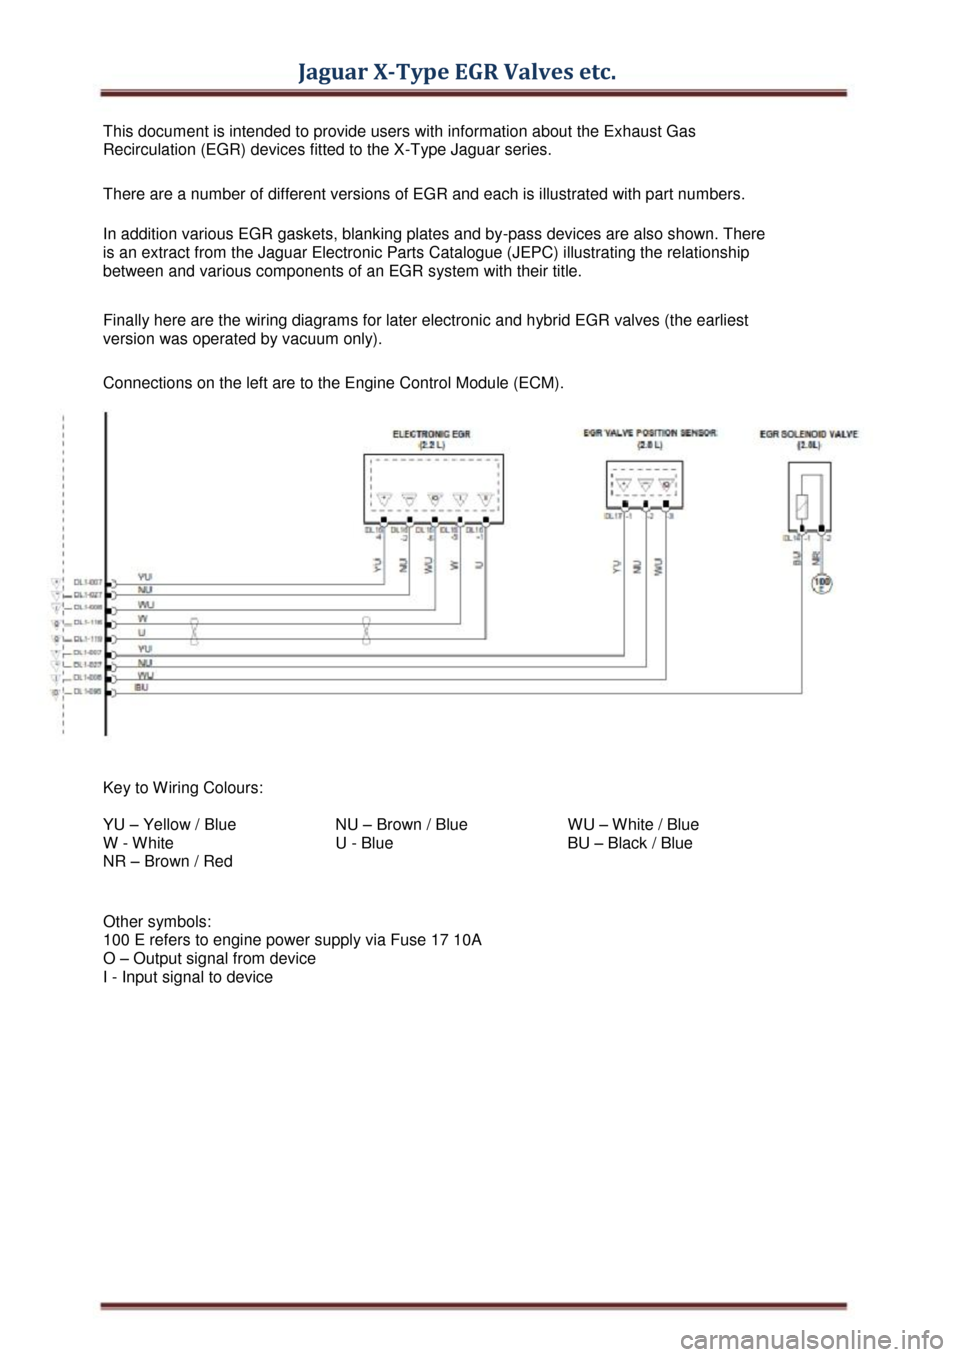 JAGUAR X TYPE 2004 1.G EGR Valves Parts Manual Jaguar X-Type EGR Valves etc. 
This document is intended to provide users with information about the Exhaust Gas 
Recirculation (EGR) devices fitted to the X-Type Jaguar series. 
There are a number of